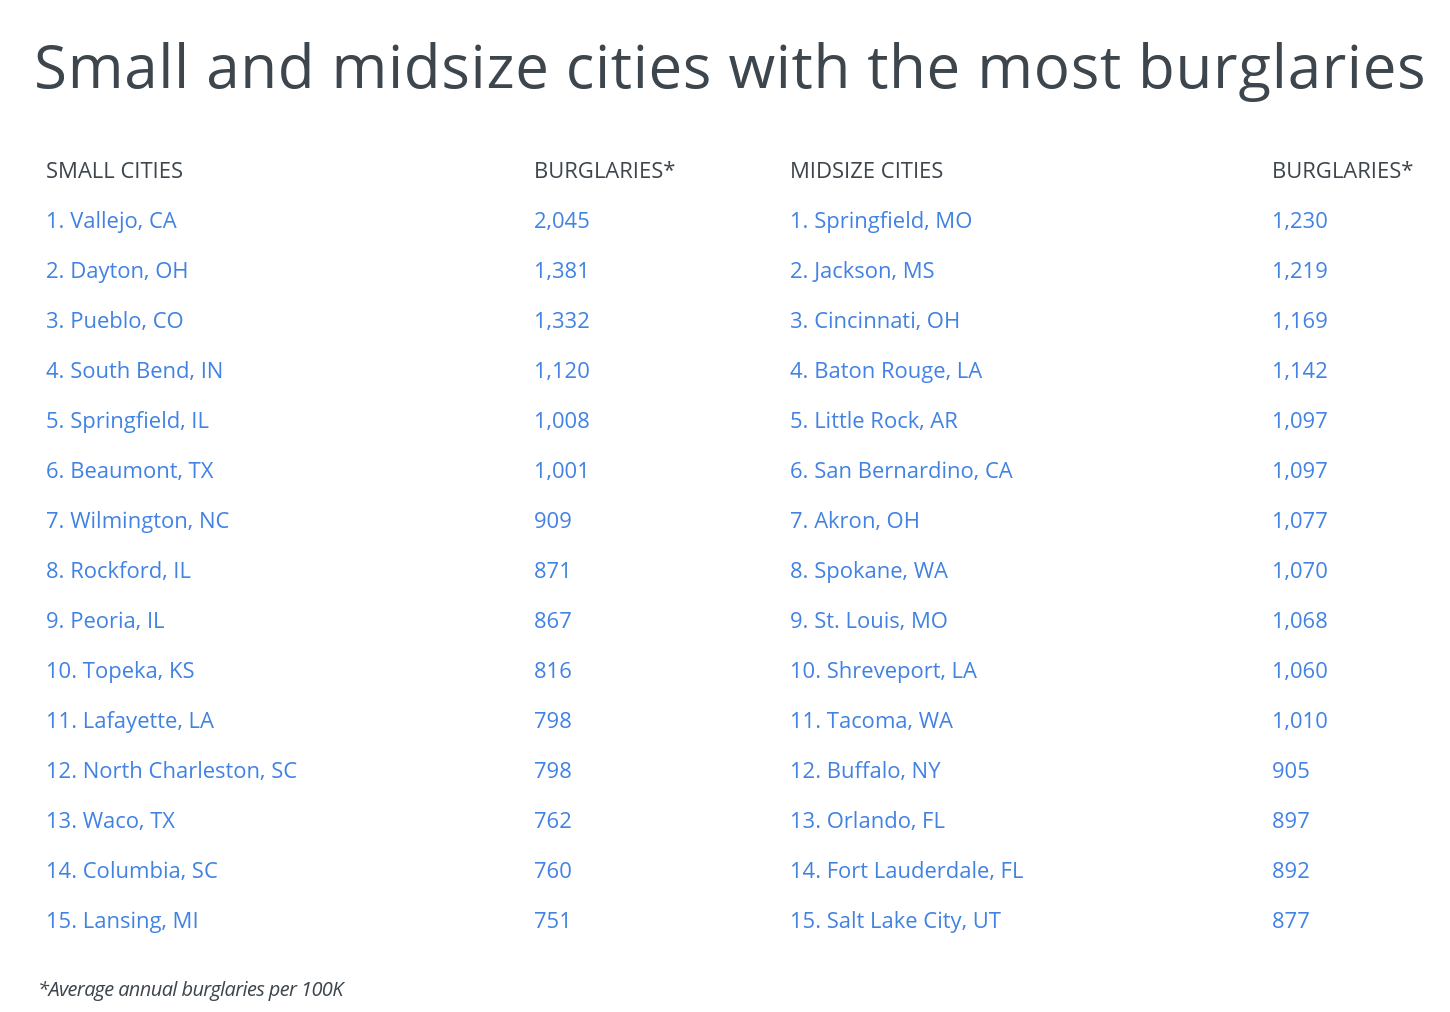 Small and midsize cities with the most burglaries